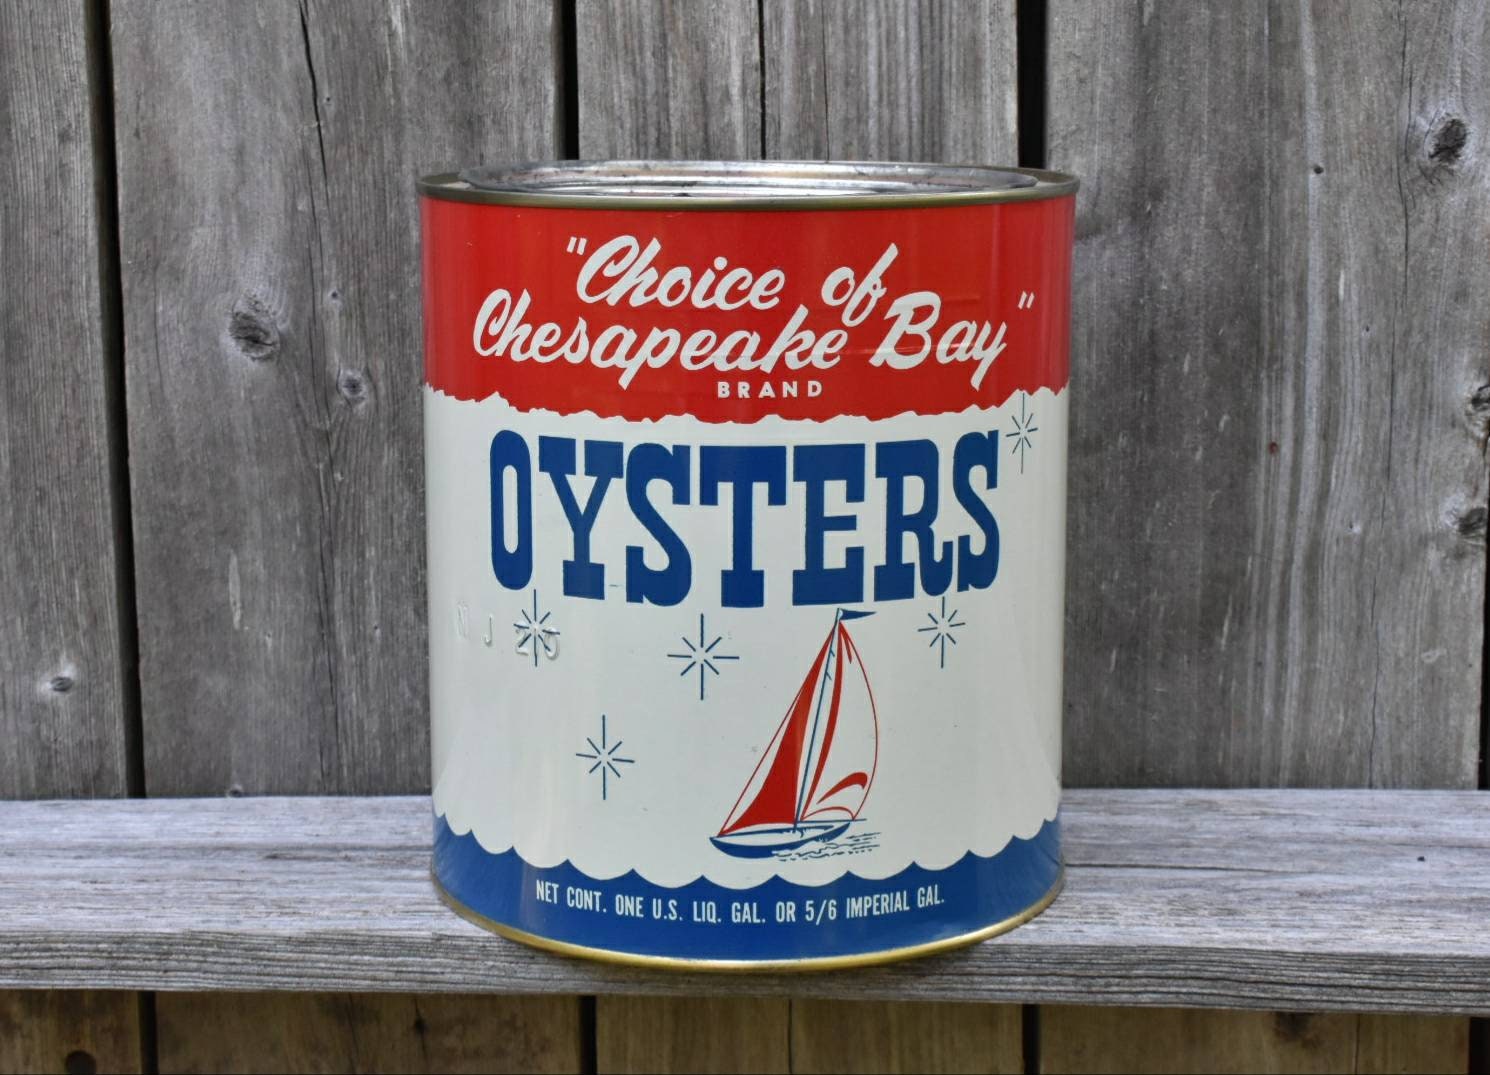 Vintage Oyster Tin Advertising Can Choice Of Chesapeake Bay From Remlik Virginia